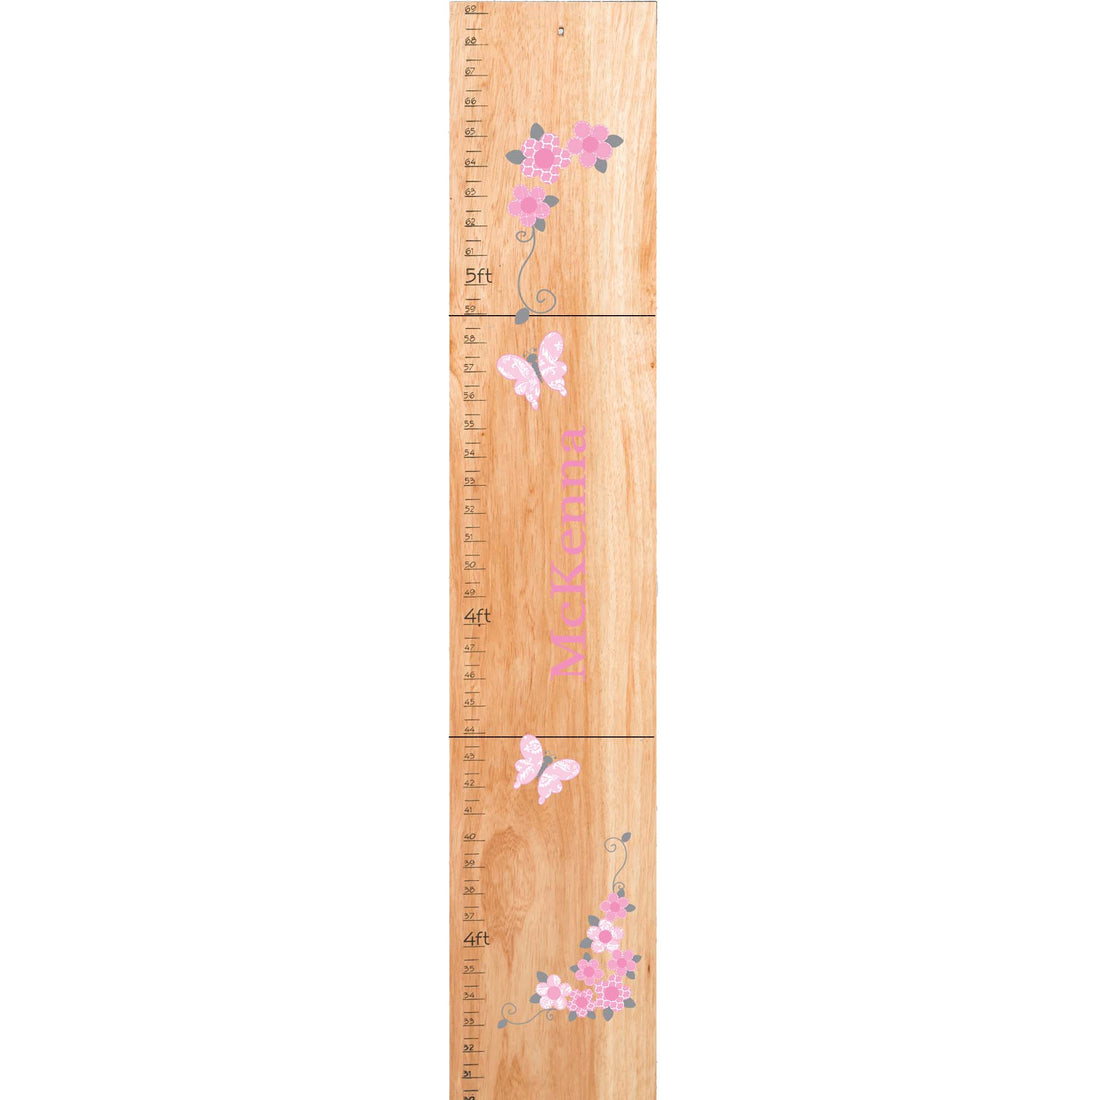 Personalized Natural Wooden Growth Chart with Pink and Gray Butterflies design